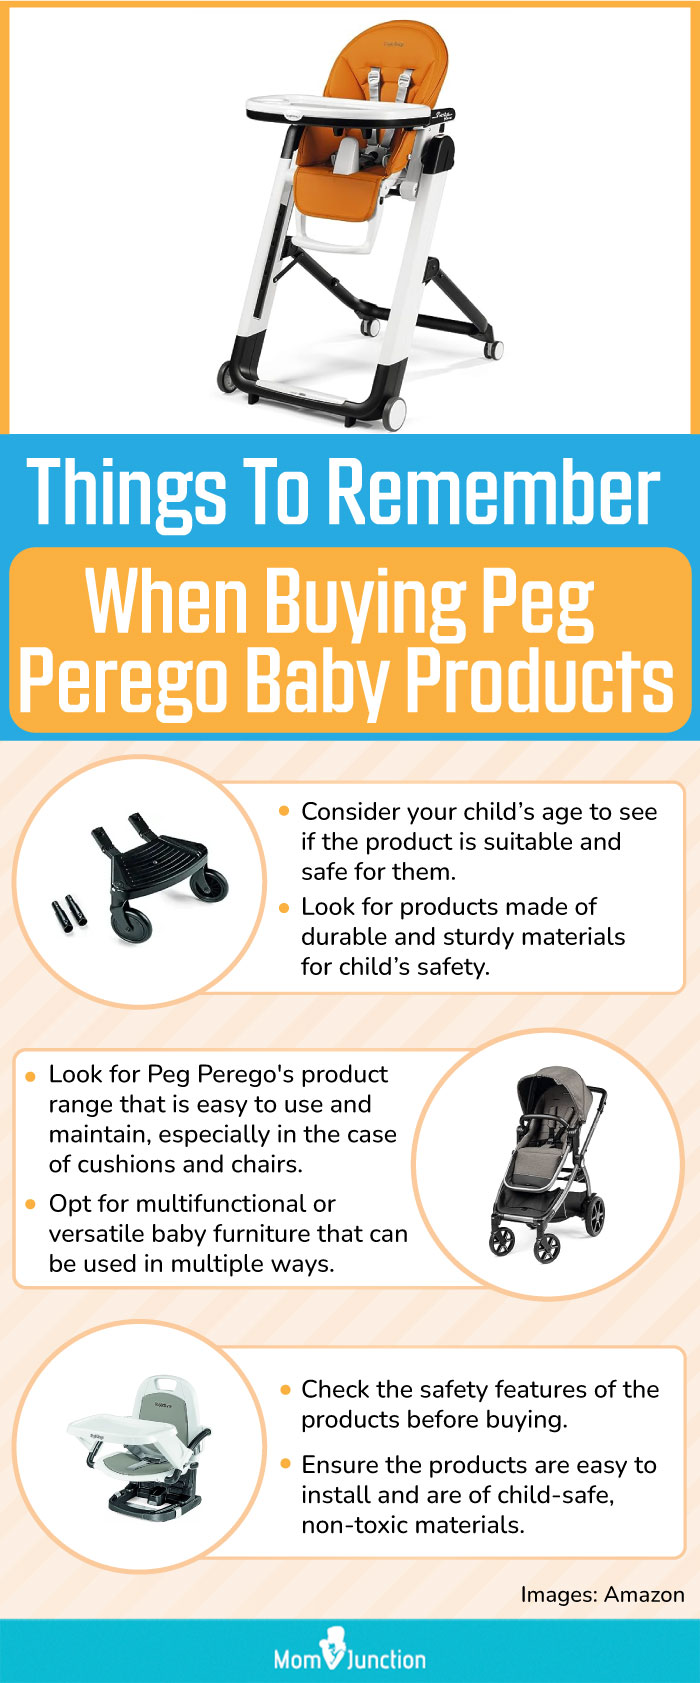 Things To Remember When Buying Peg Perego Baby Products (infographic)